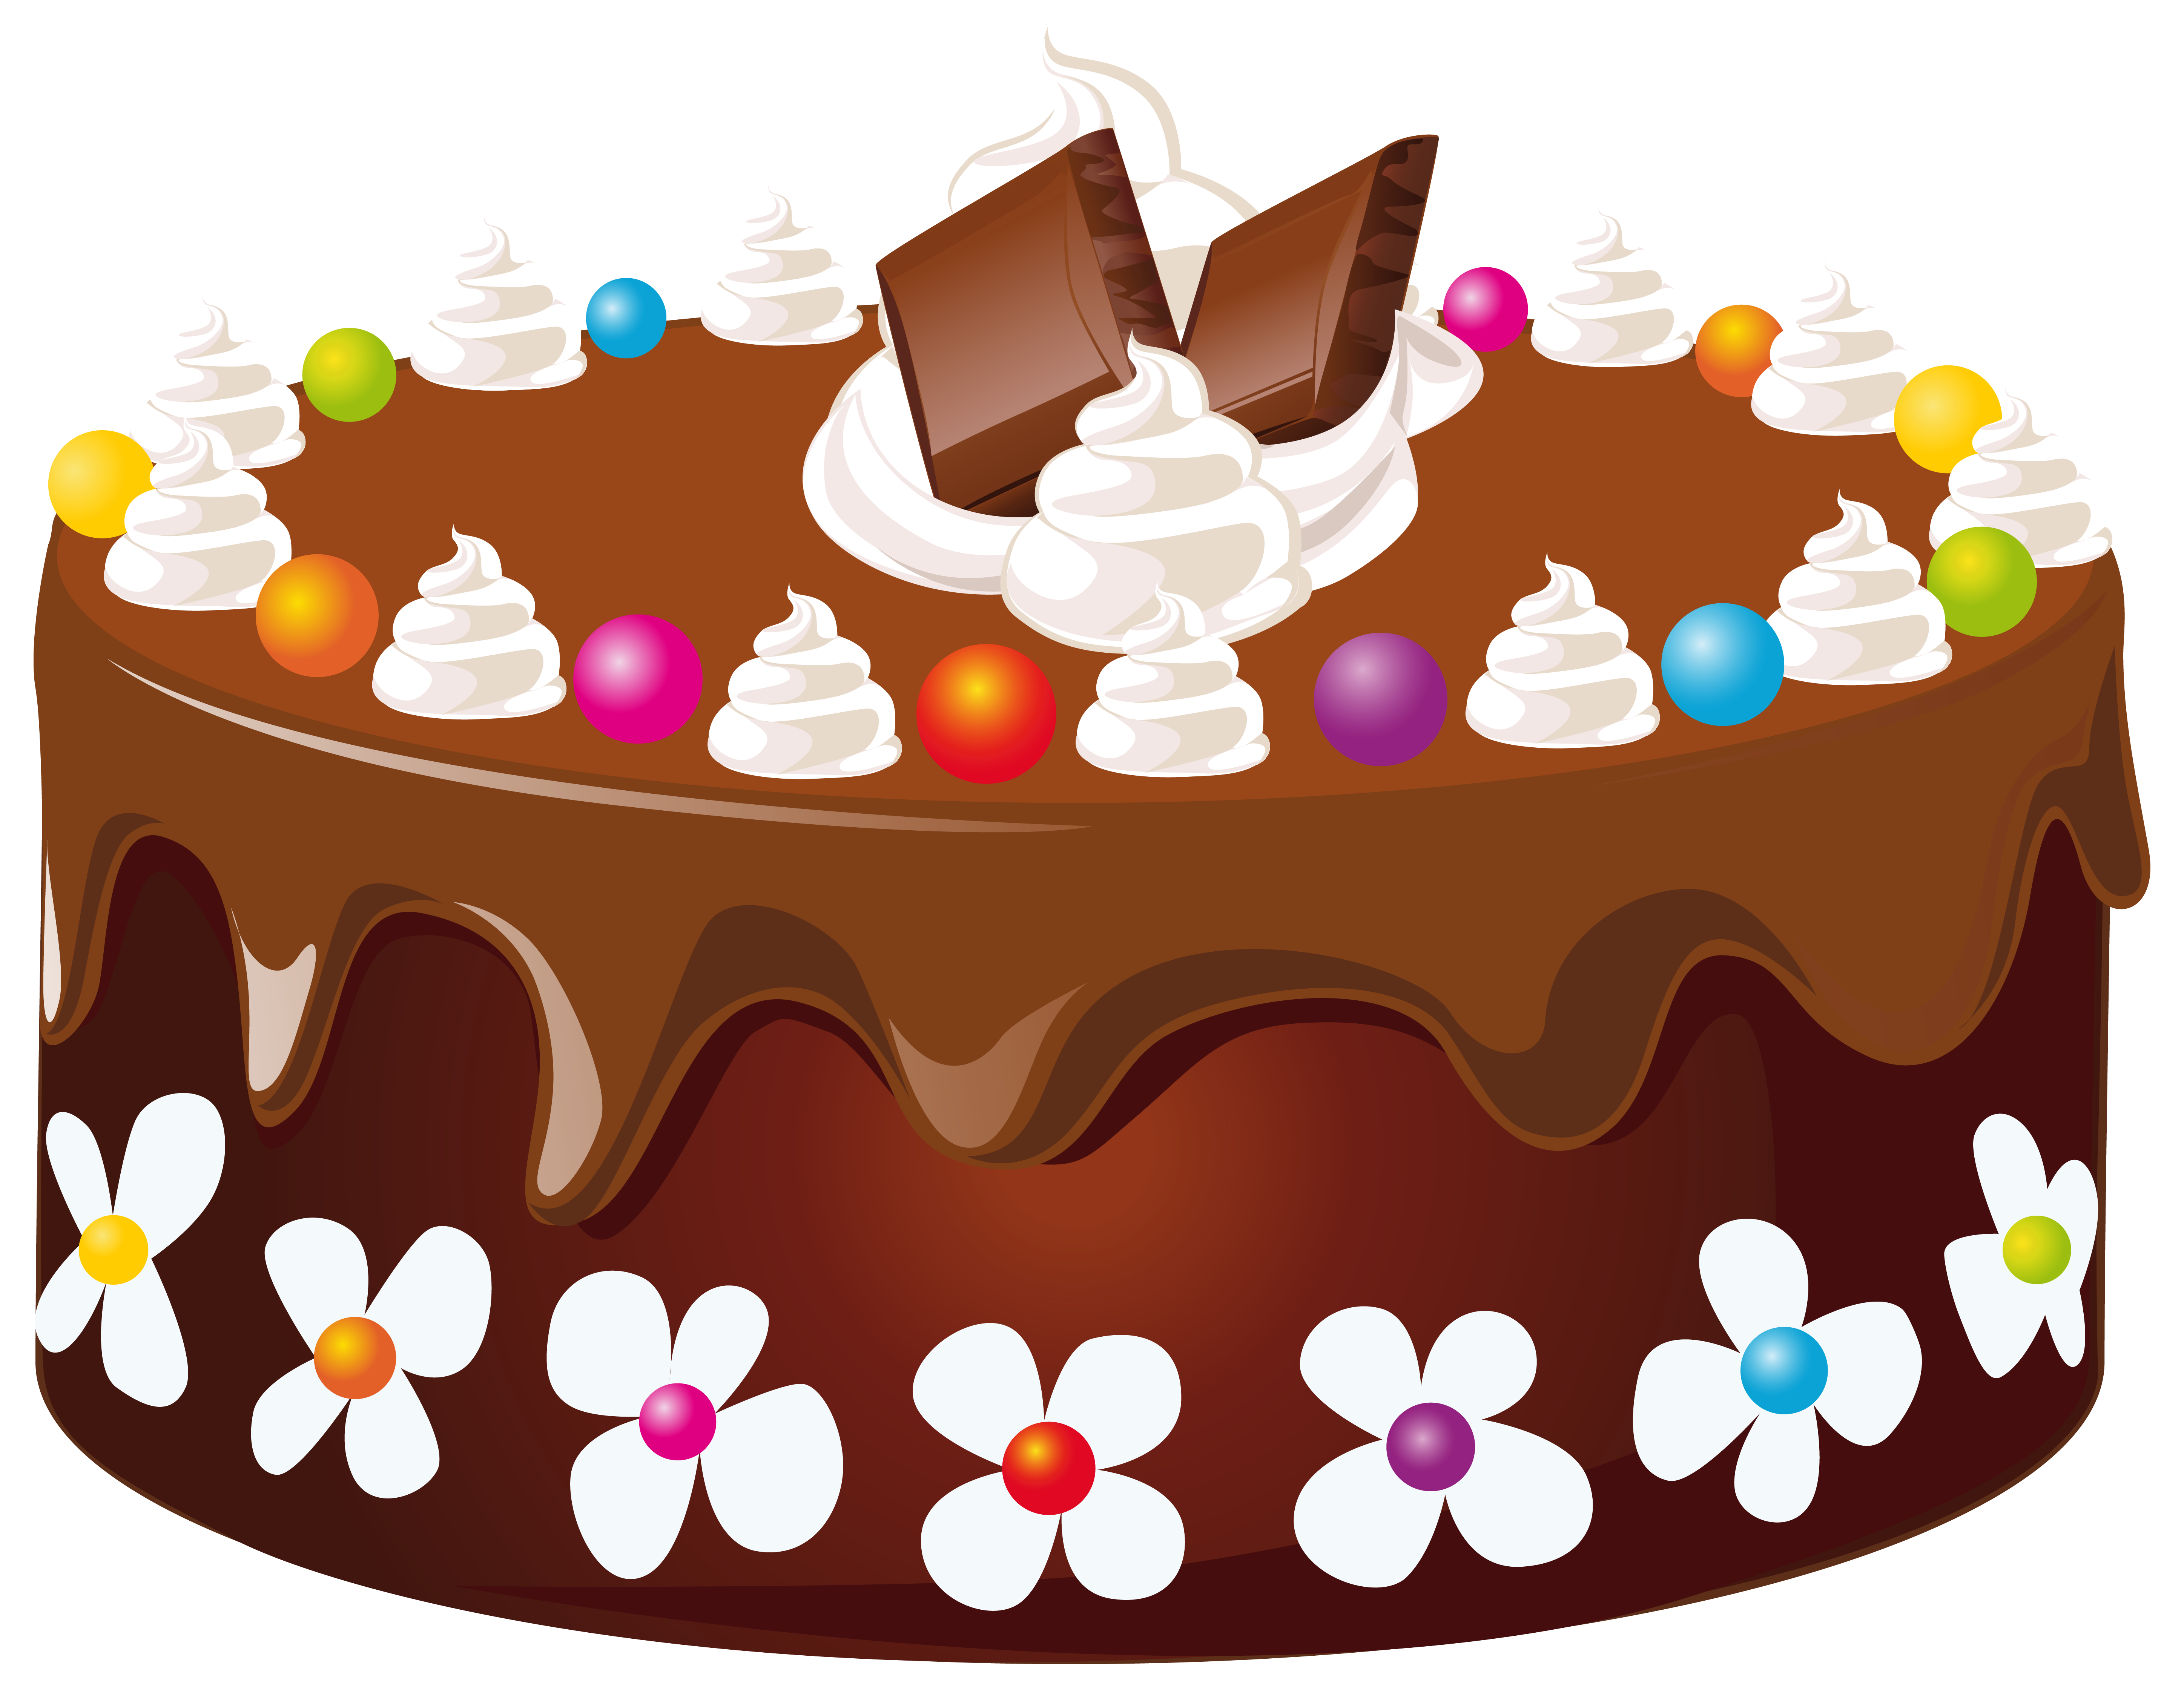 Chocolate Birthday Cake 3d Illustration, Chocolate, Birthday Cake, Birthday  PNG Transparent Image and Clipart for Free Download